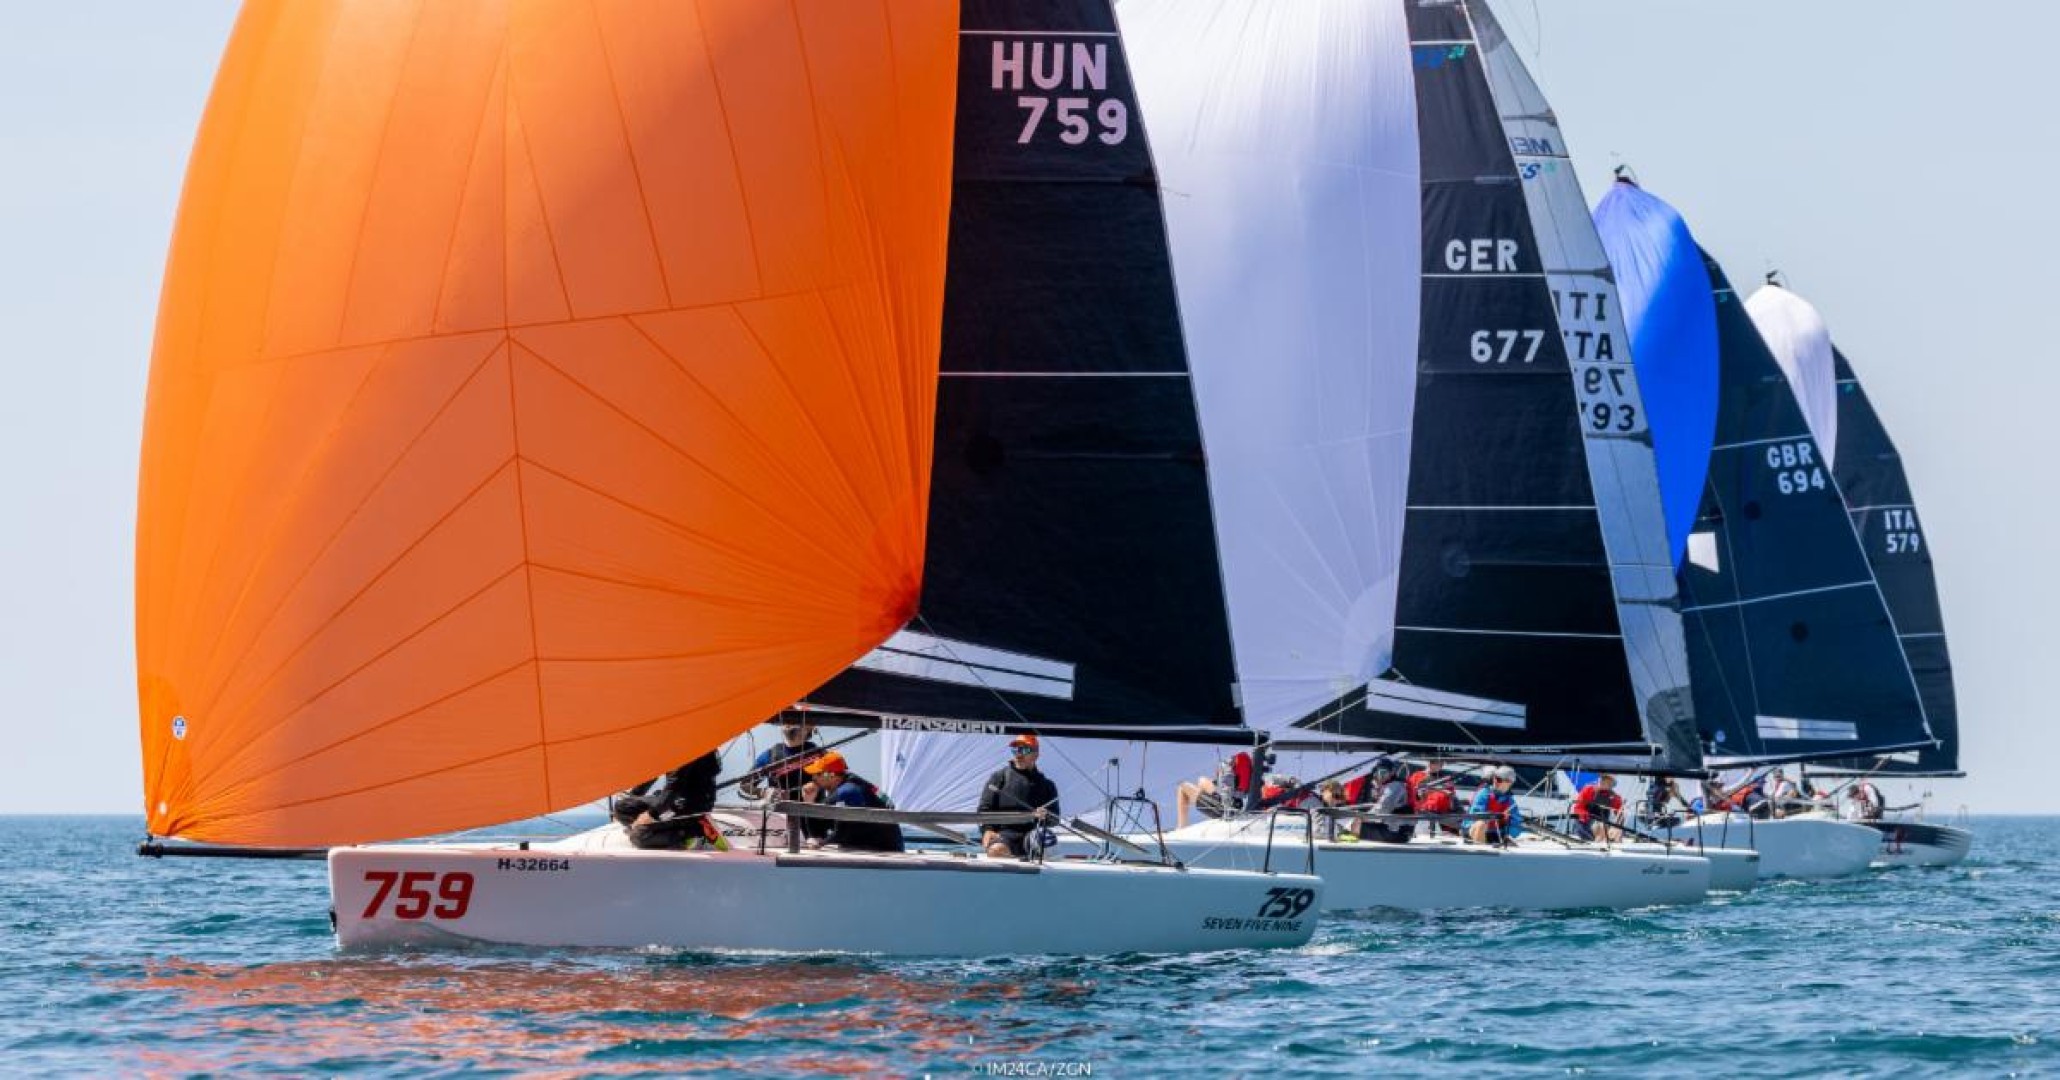 Tied on sixteen points, the Corinthian leaders Seven_Five_Nine HUN759 of Akos Csolto and White Room GER677 of Michael Tarabochia are leading the pack before the final day of the second event of the Melges 24 European Sailing Series 2022 in Trieste, Italy © IM24CA/Zerogradinord